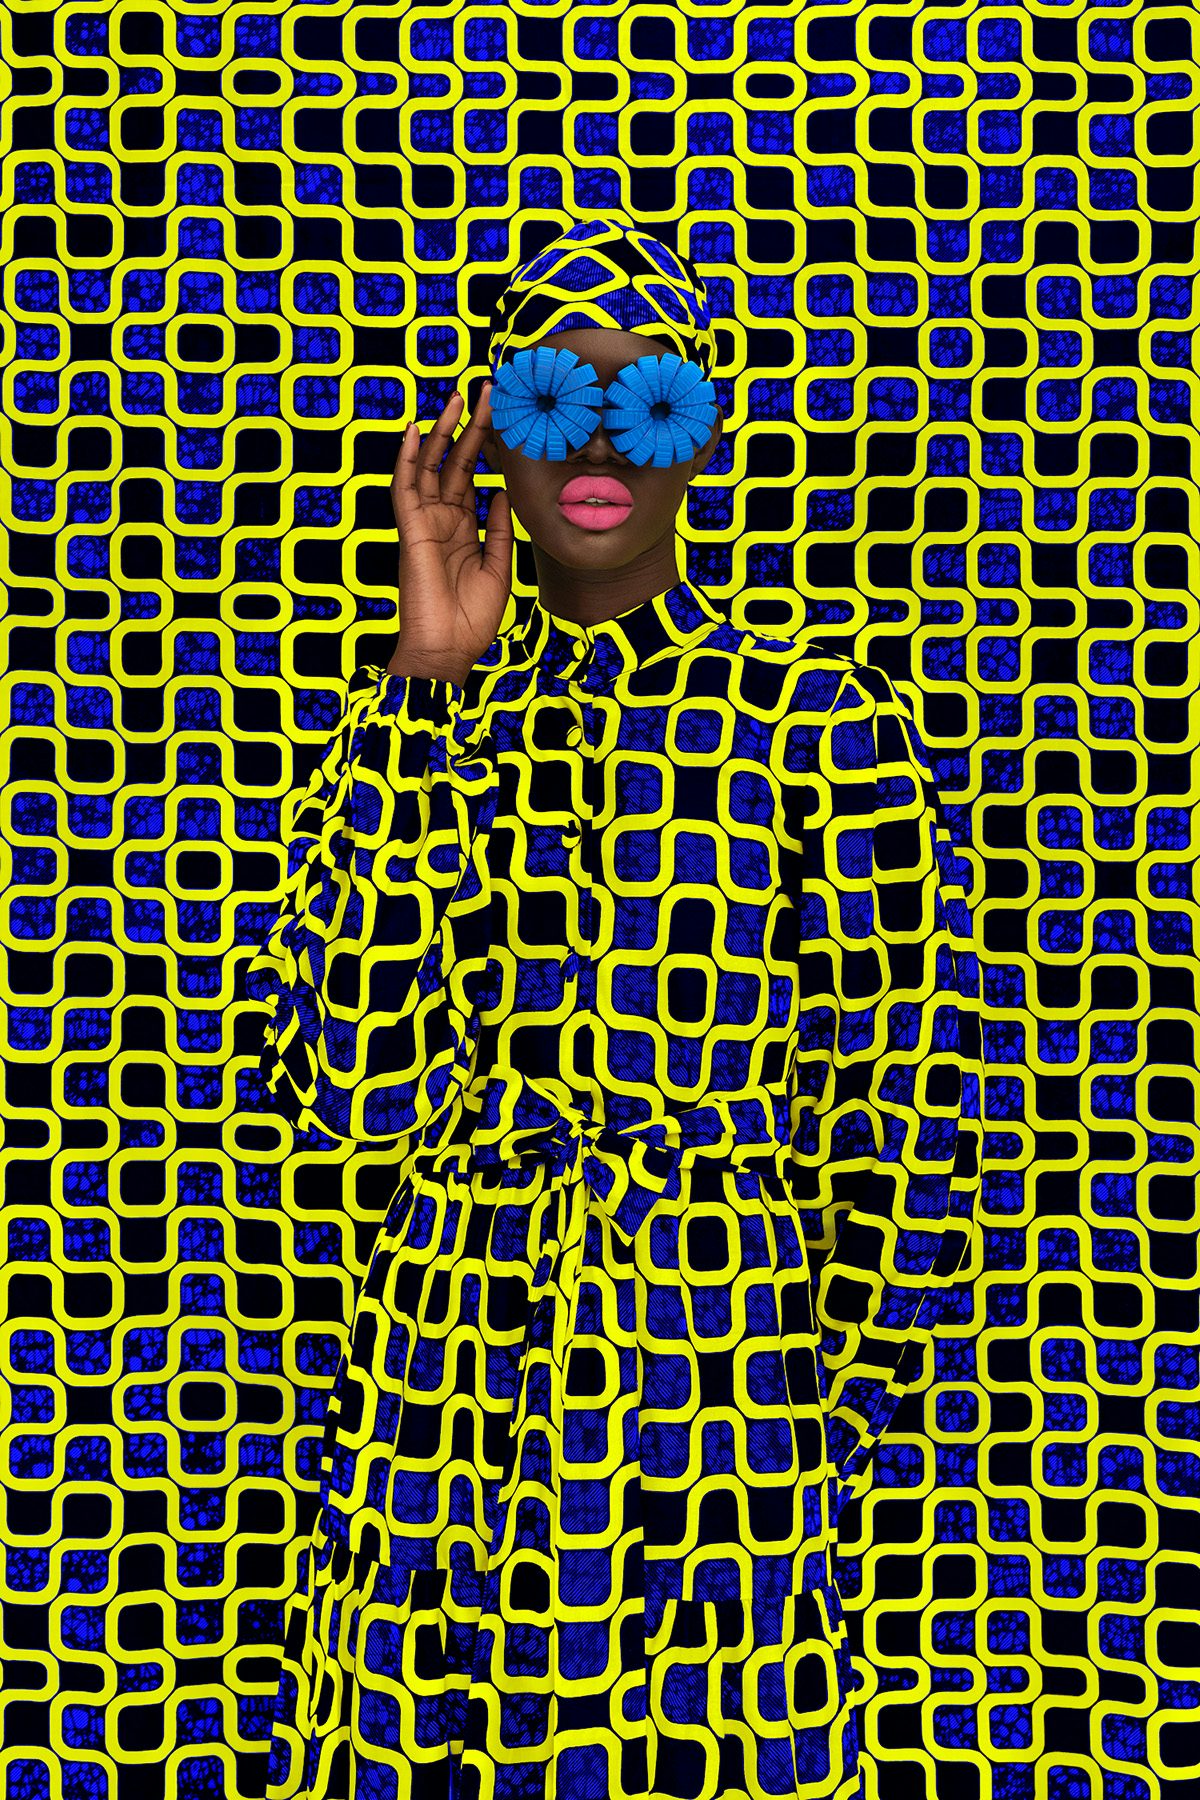 A woman wearing a blue flower-shaped sunglasses, and a headdress and garment in a yellow, blue and black graphic pattern, which blends into a backdrop in the same pattern